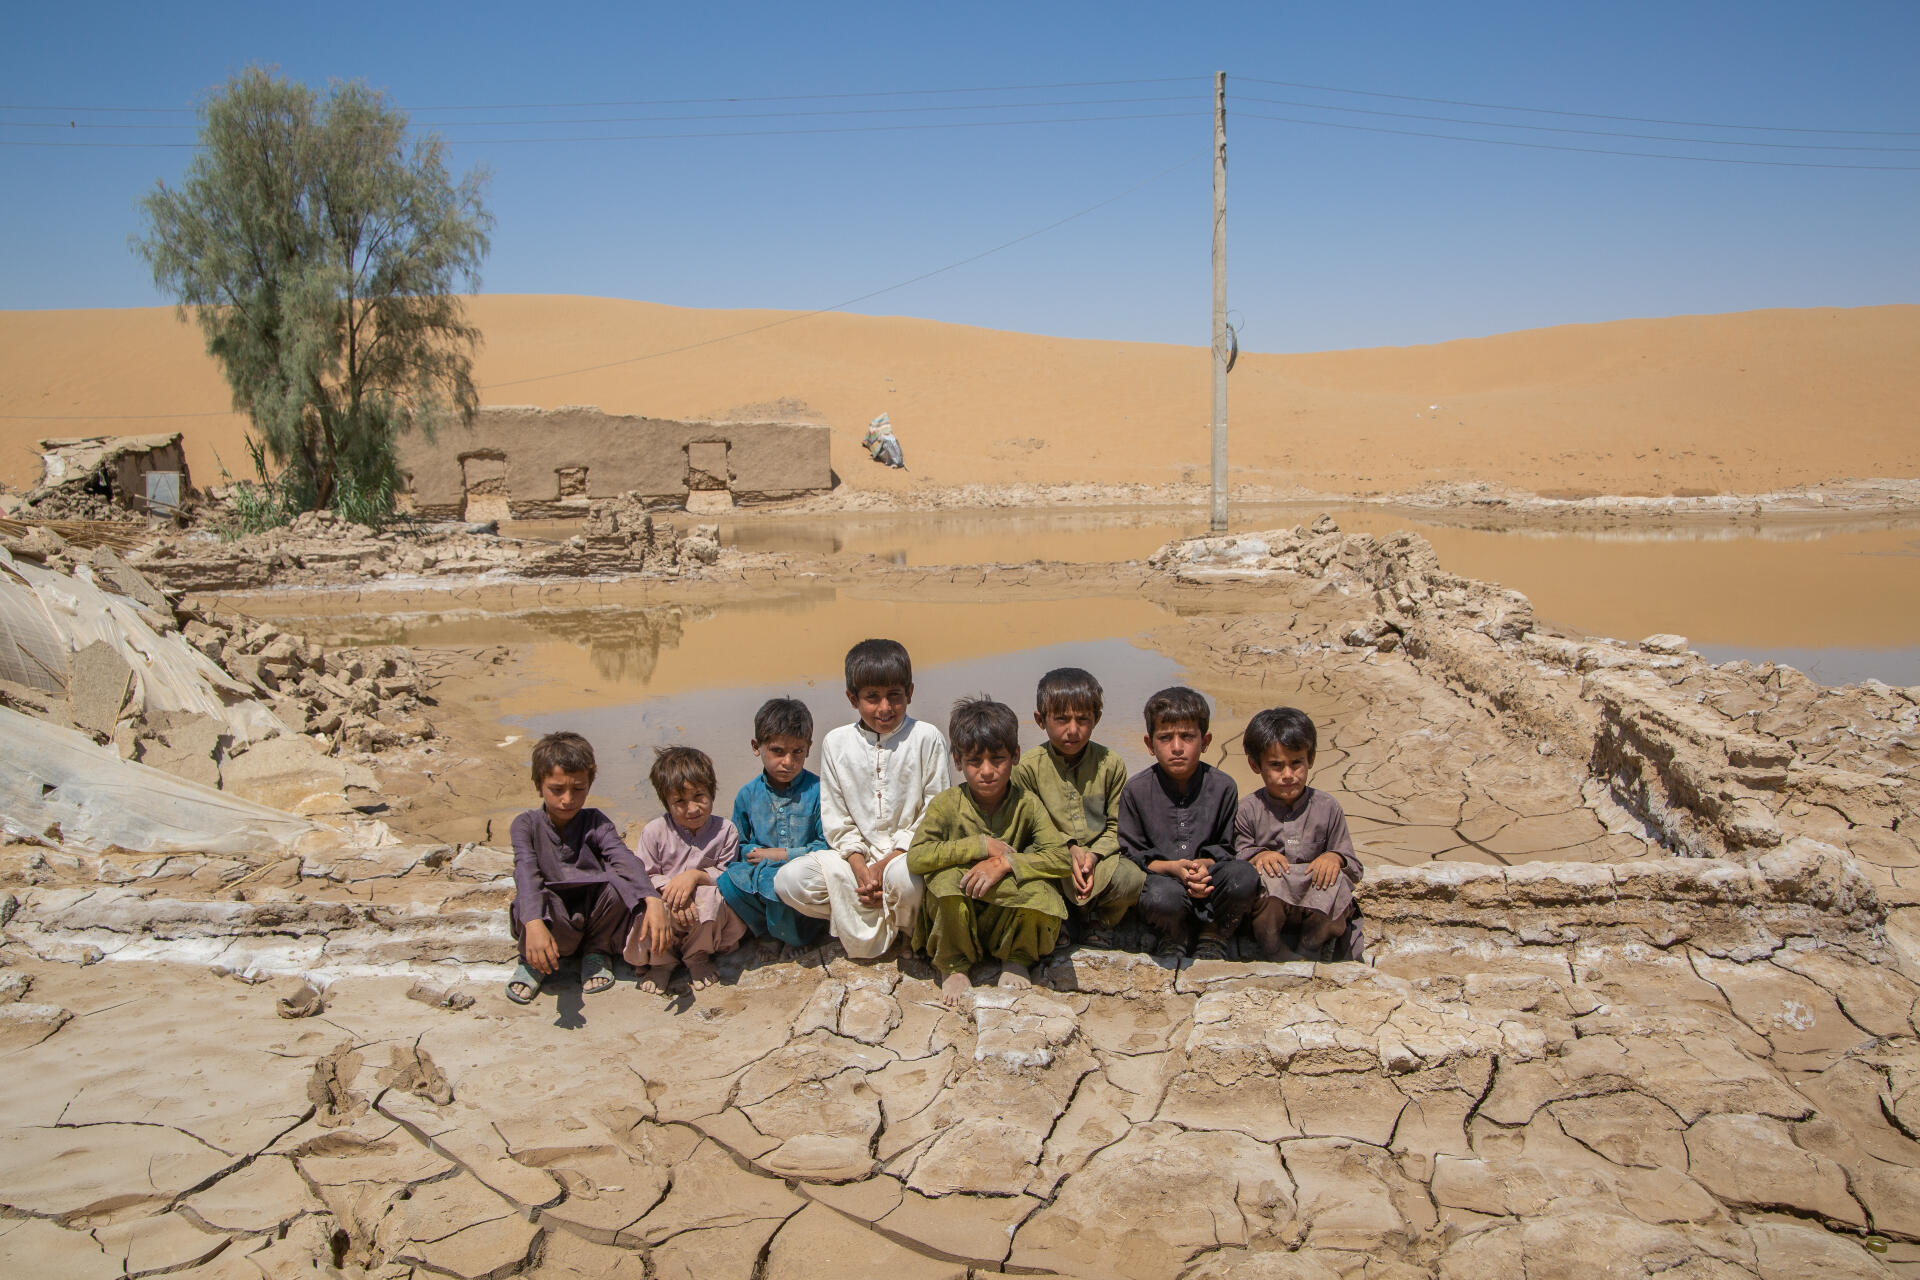 A group of kids pose for a picture on a dry and barren landscape.